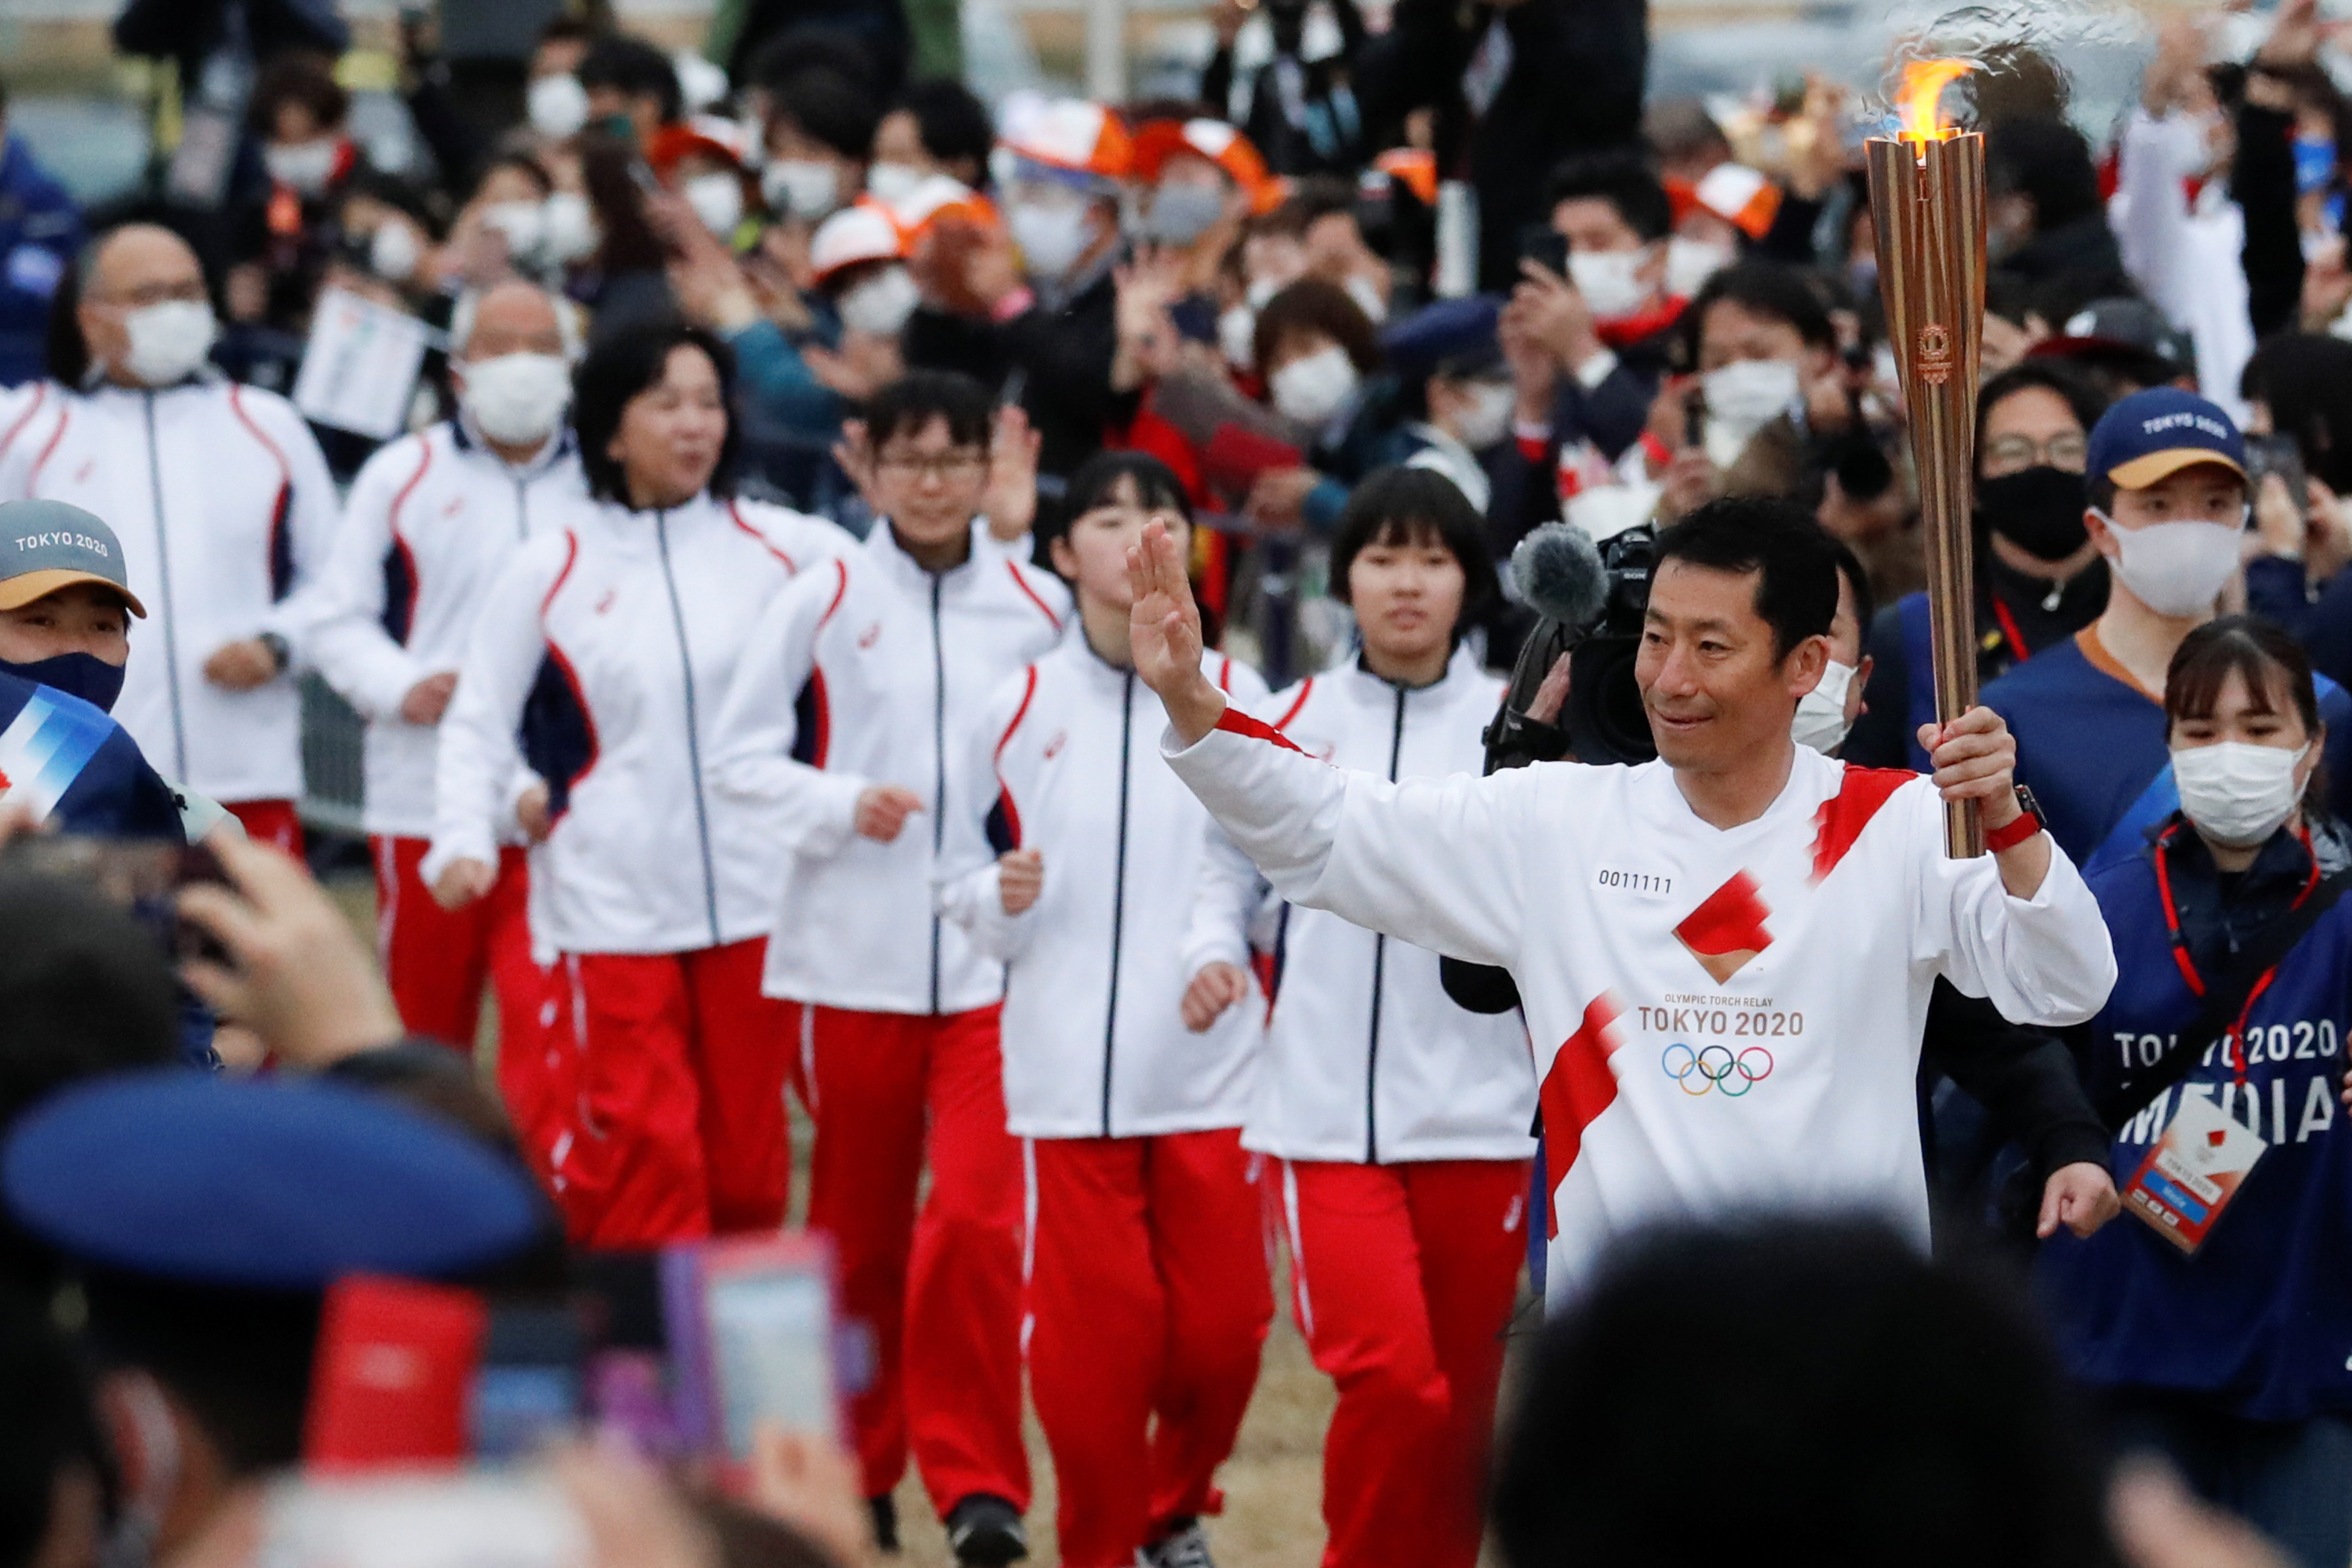 Tokyo Olympics torch staffer becomes event’s 1st COVID-19 infection